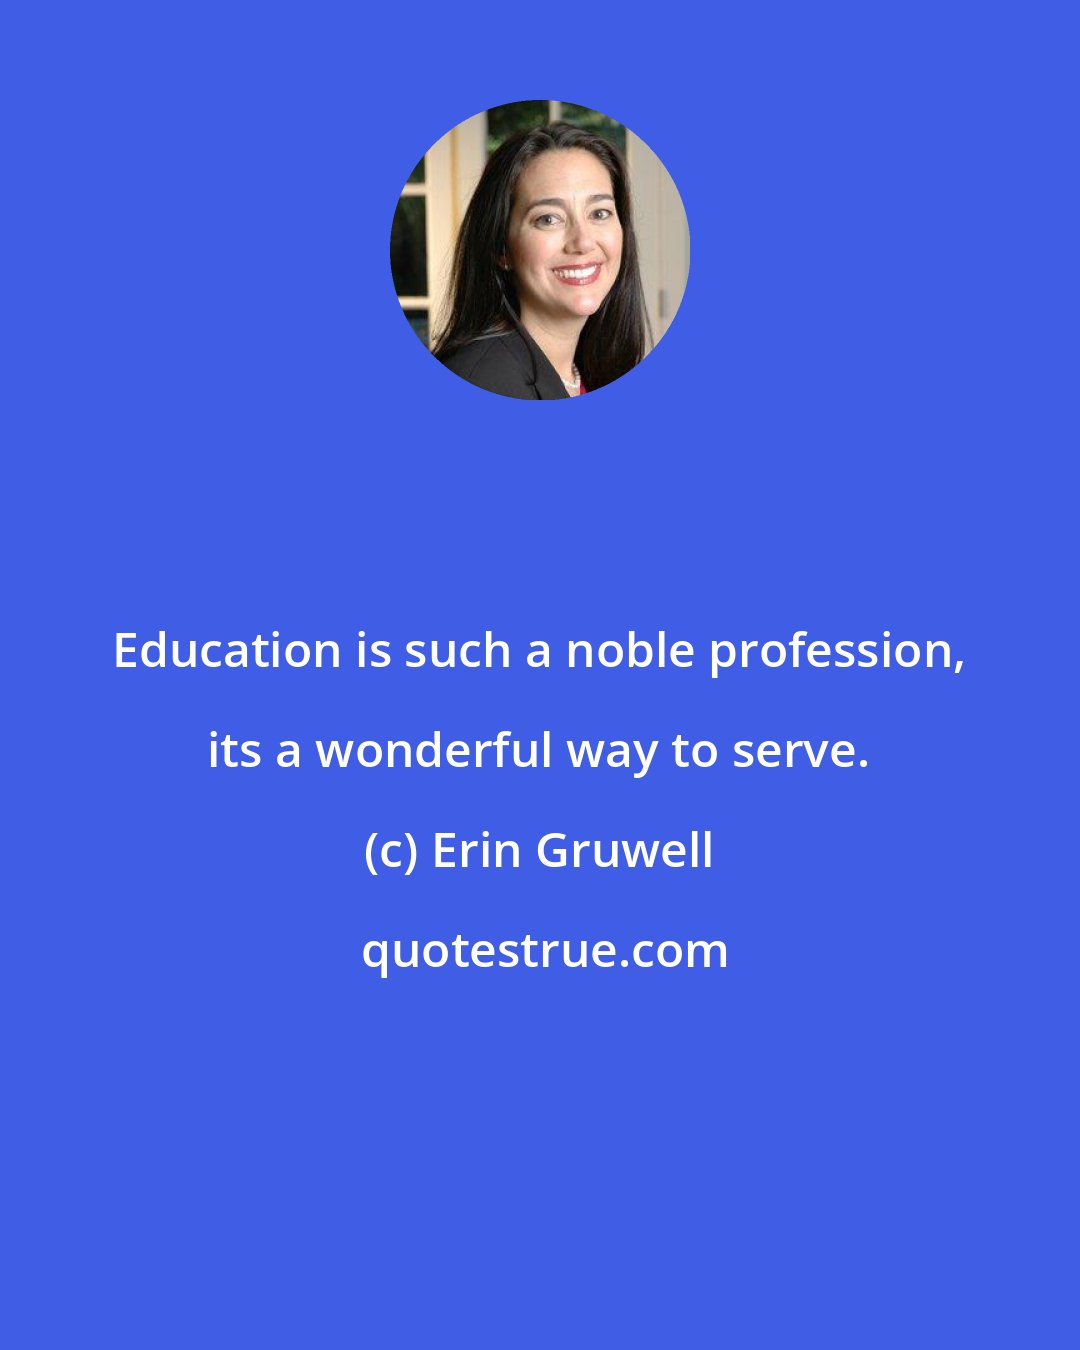 Erin Gruwell: Education is such a noble profession, its a wonderful way to serve.